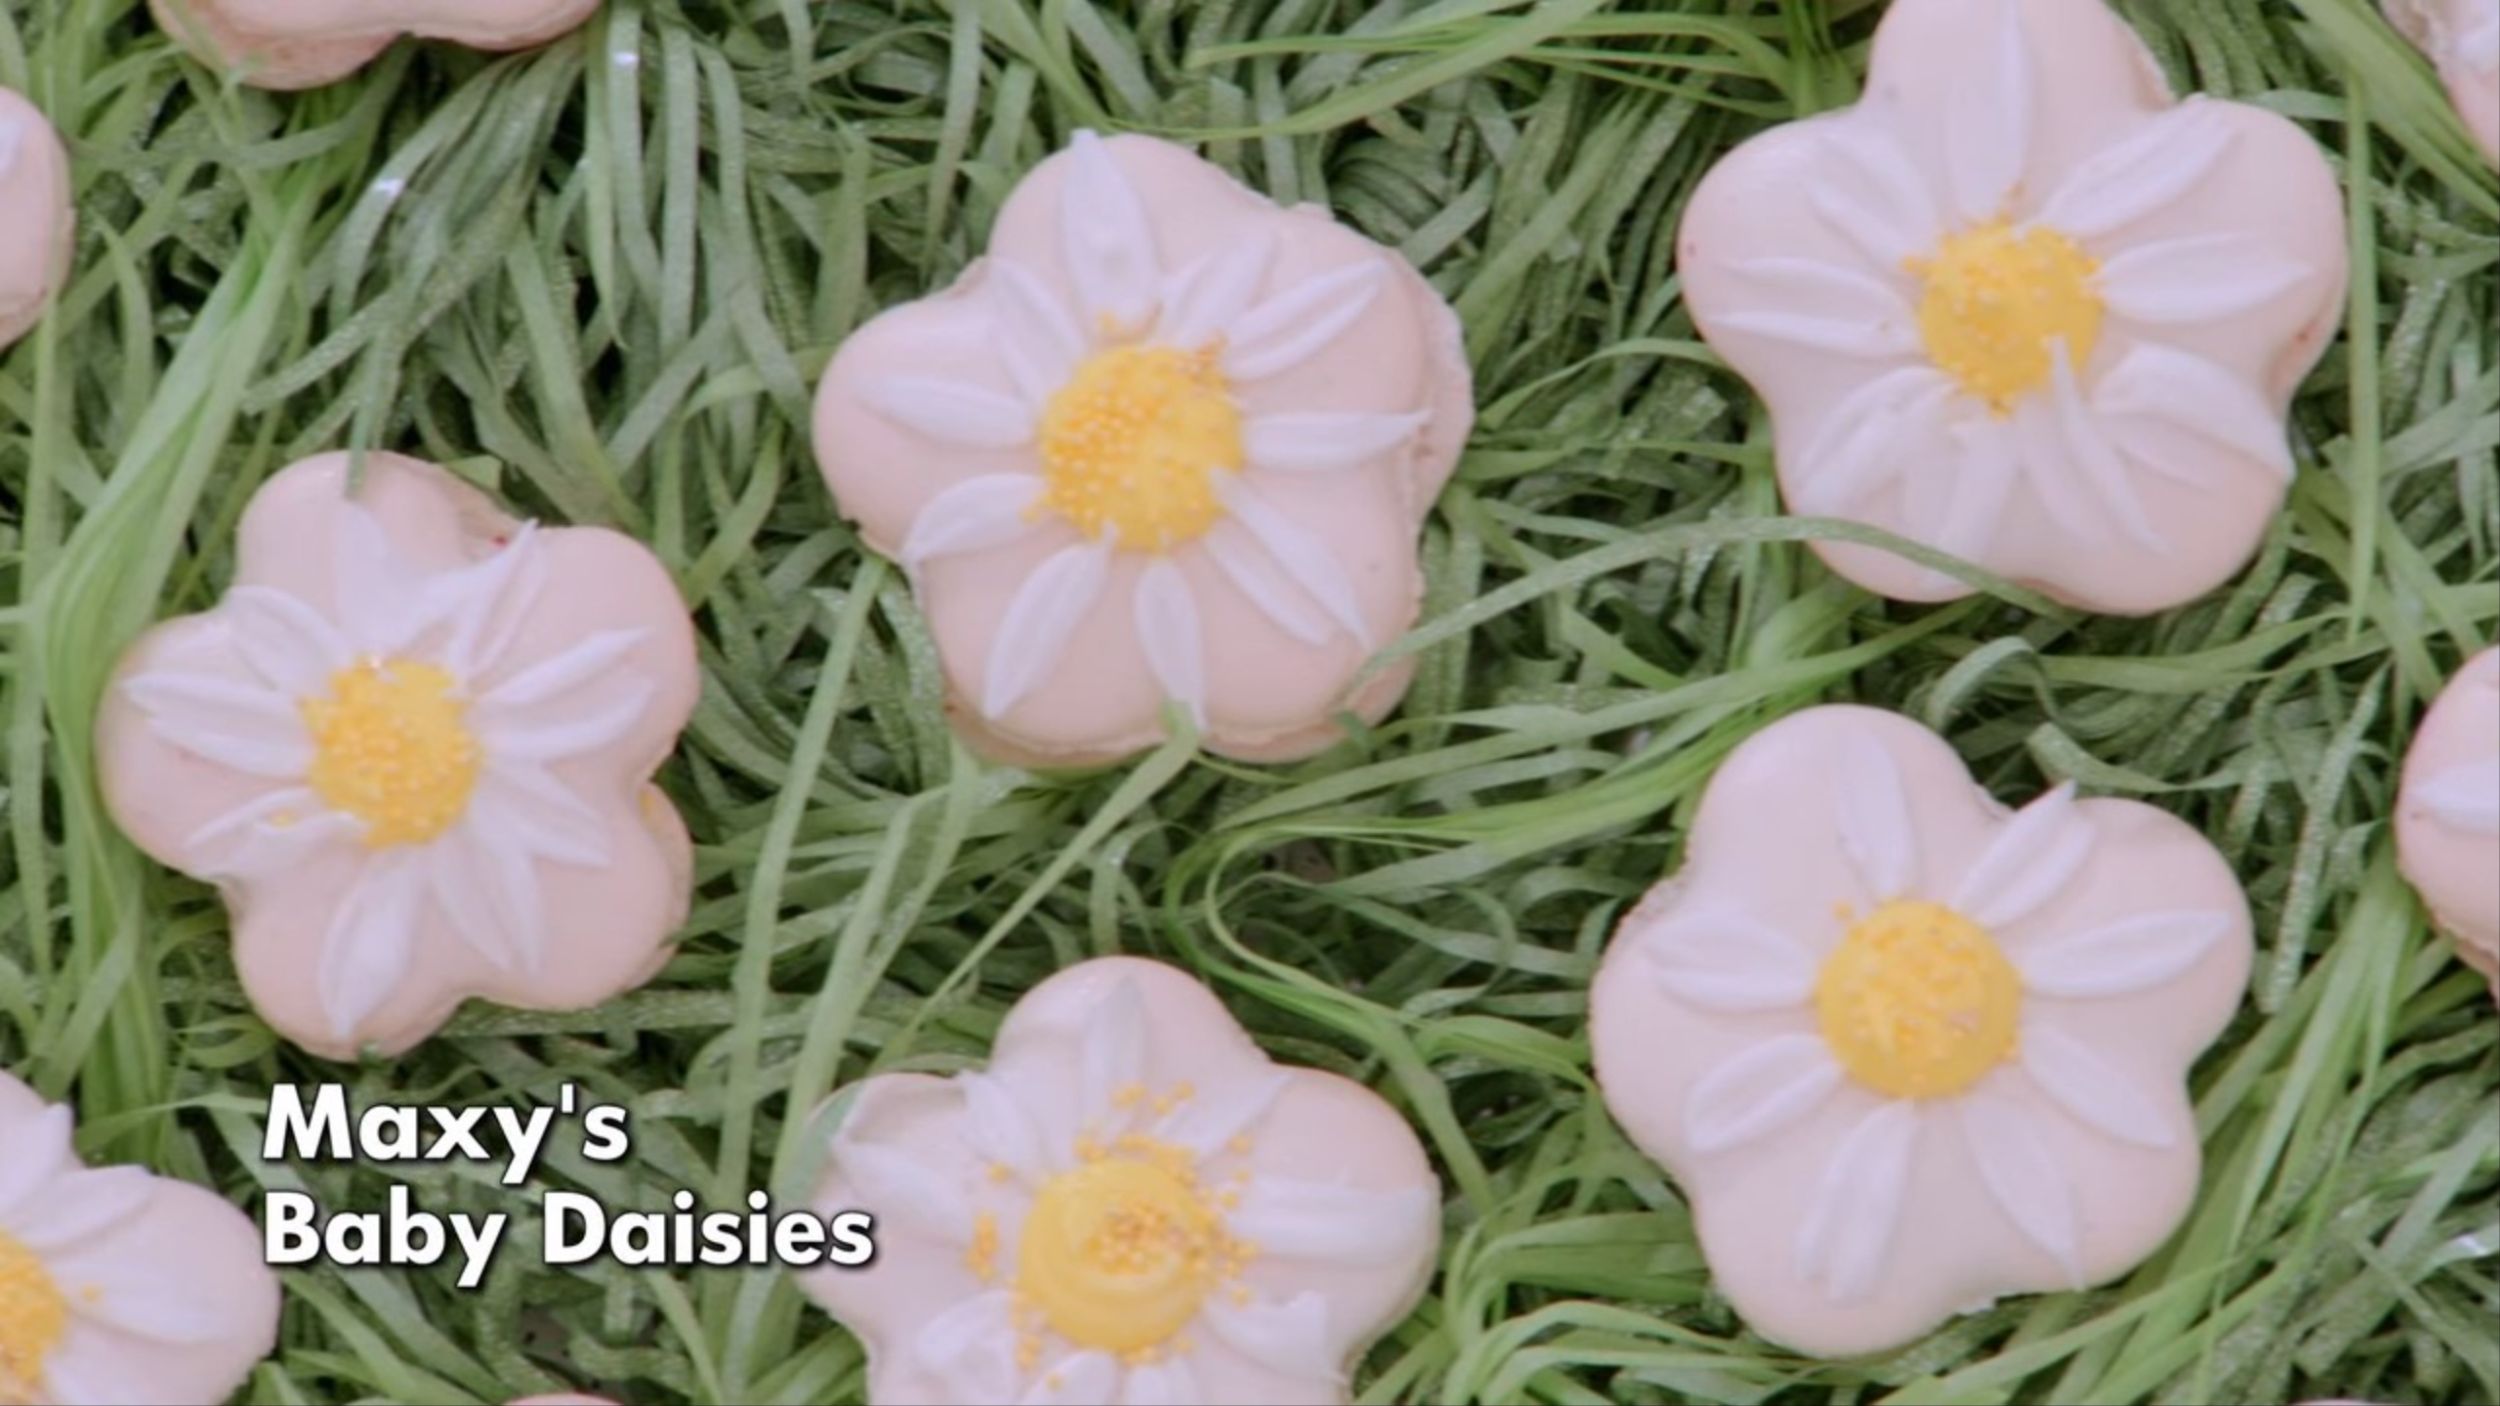 Maxys "Baby Daisies" Signature for Biscuit Week